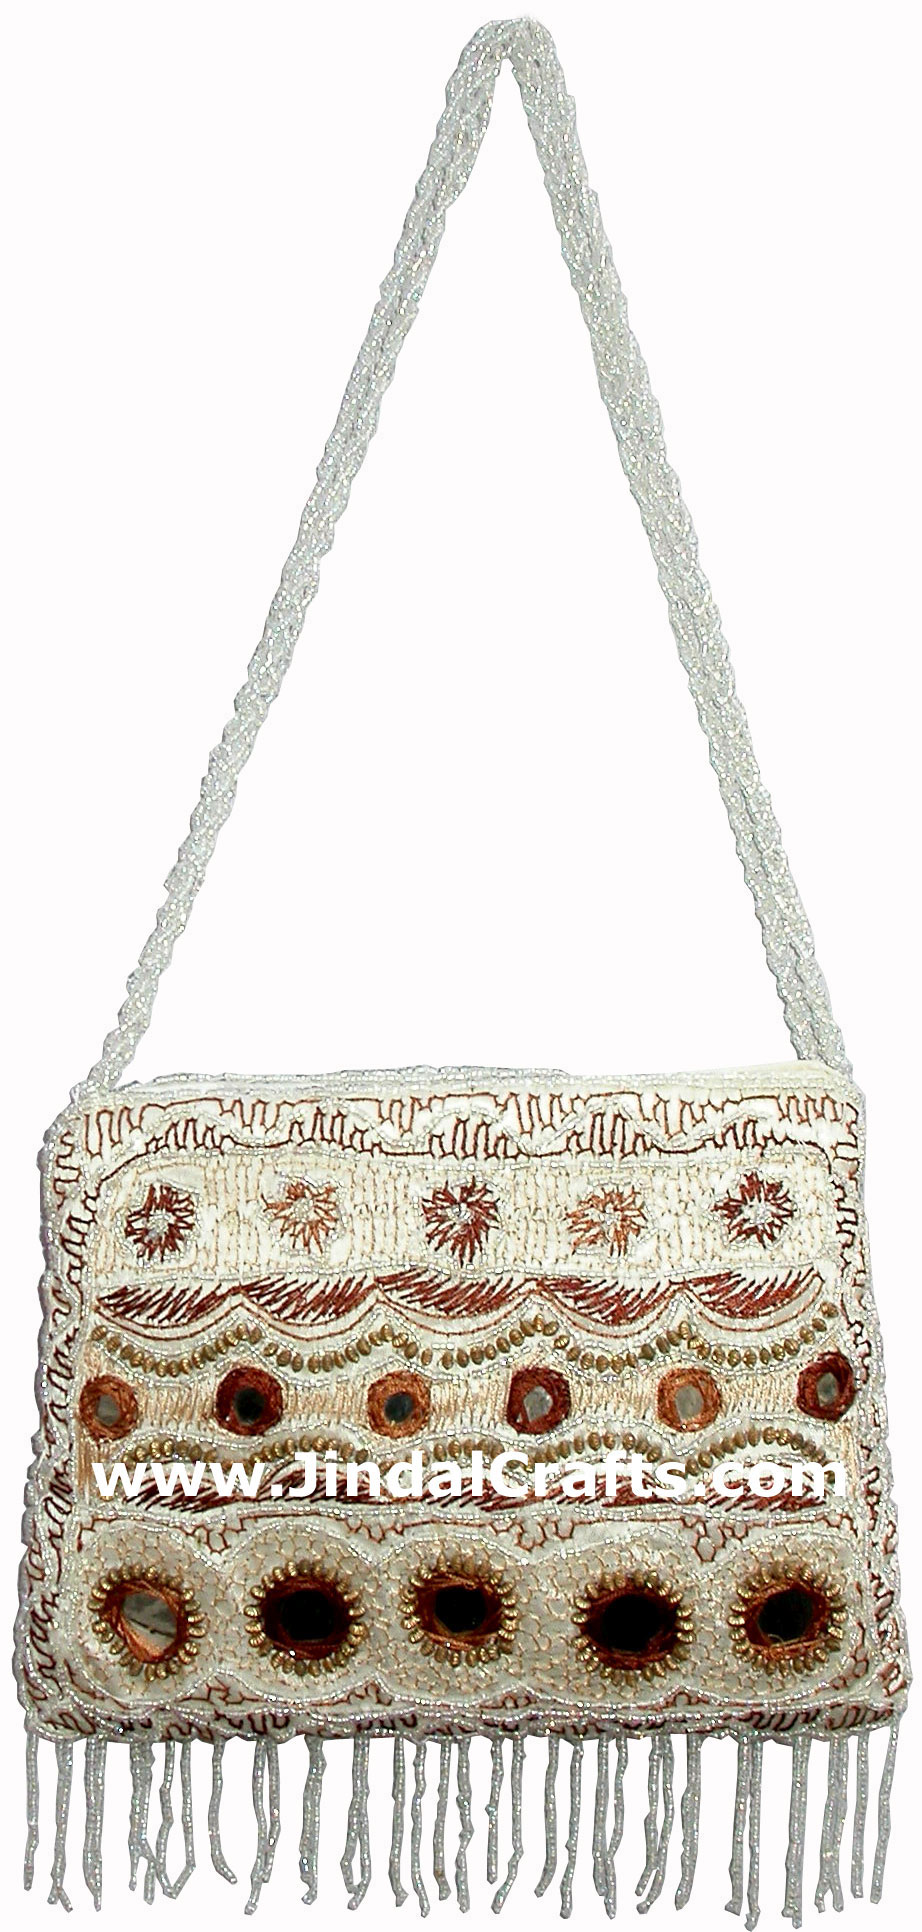 Hand Embroidered Beaded Traditional Shoulder Purse from India